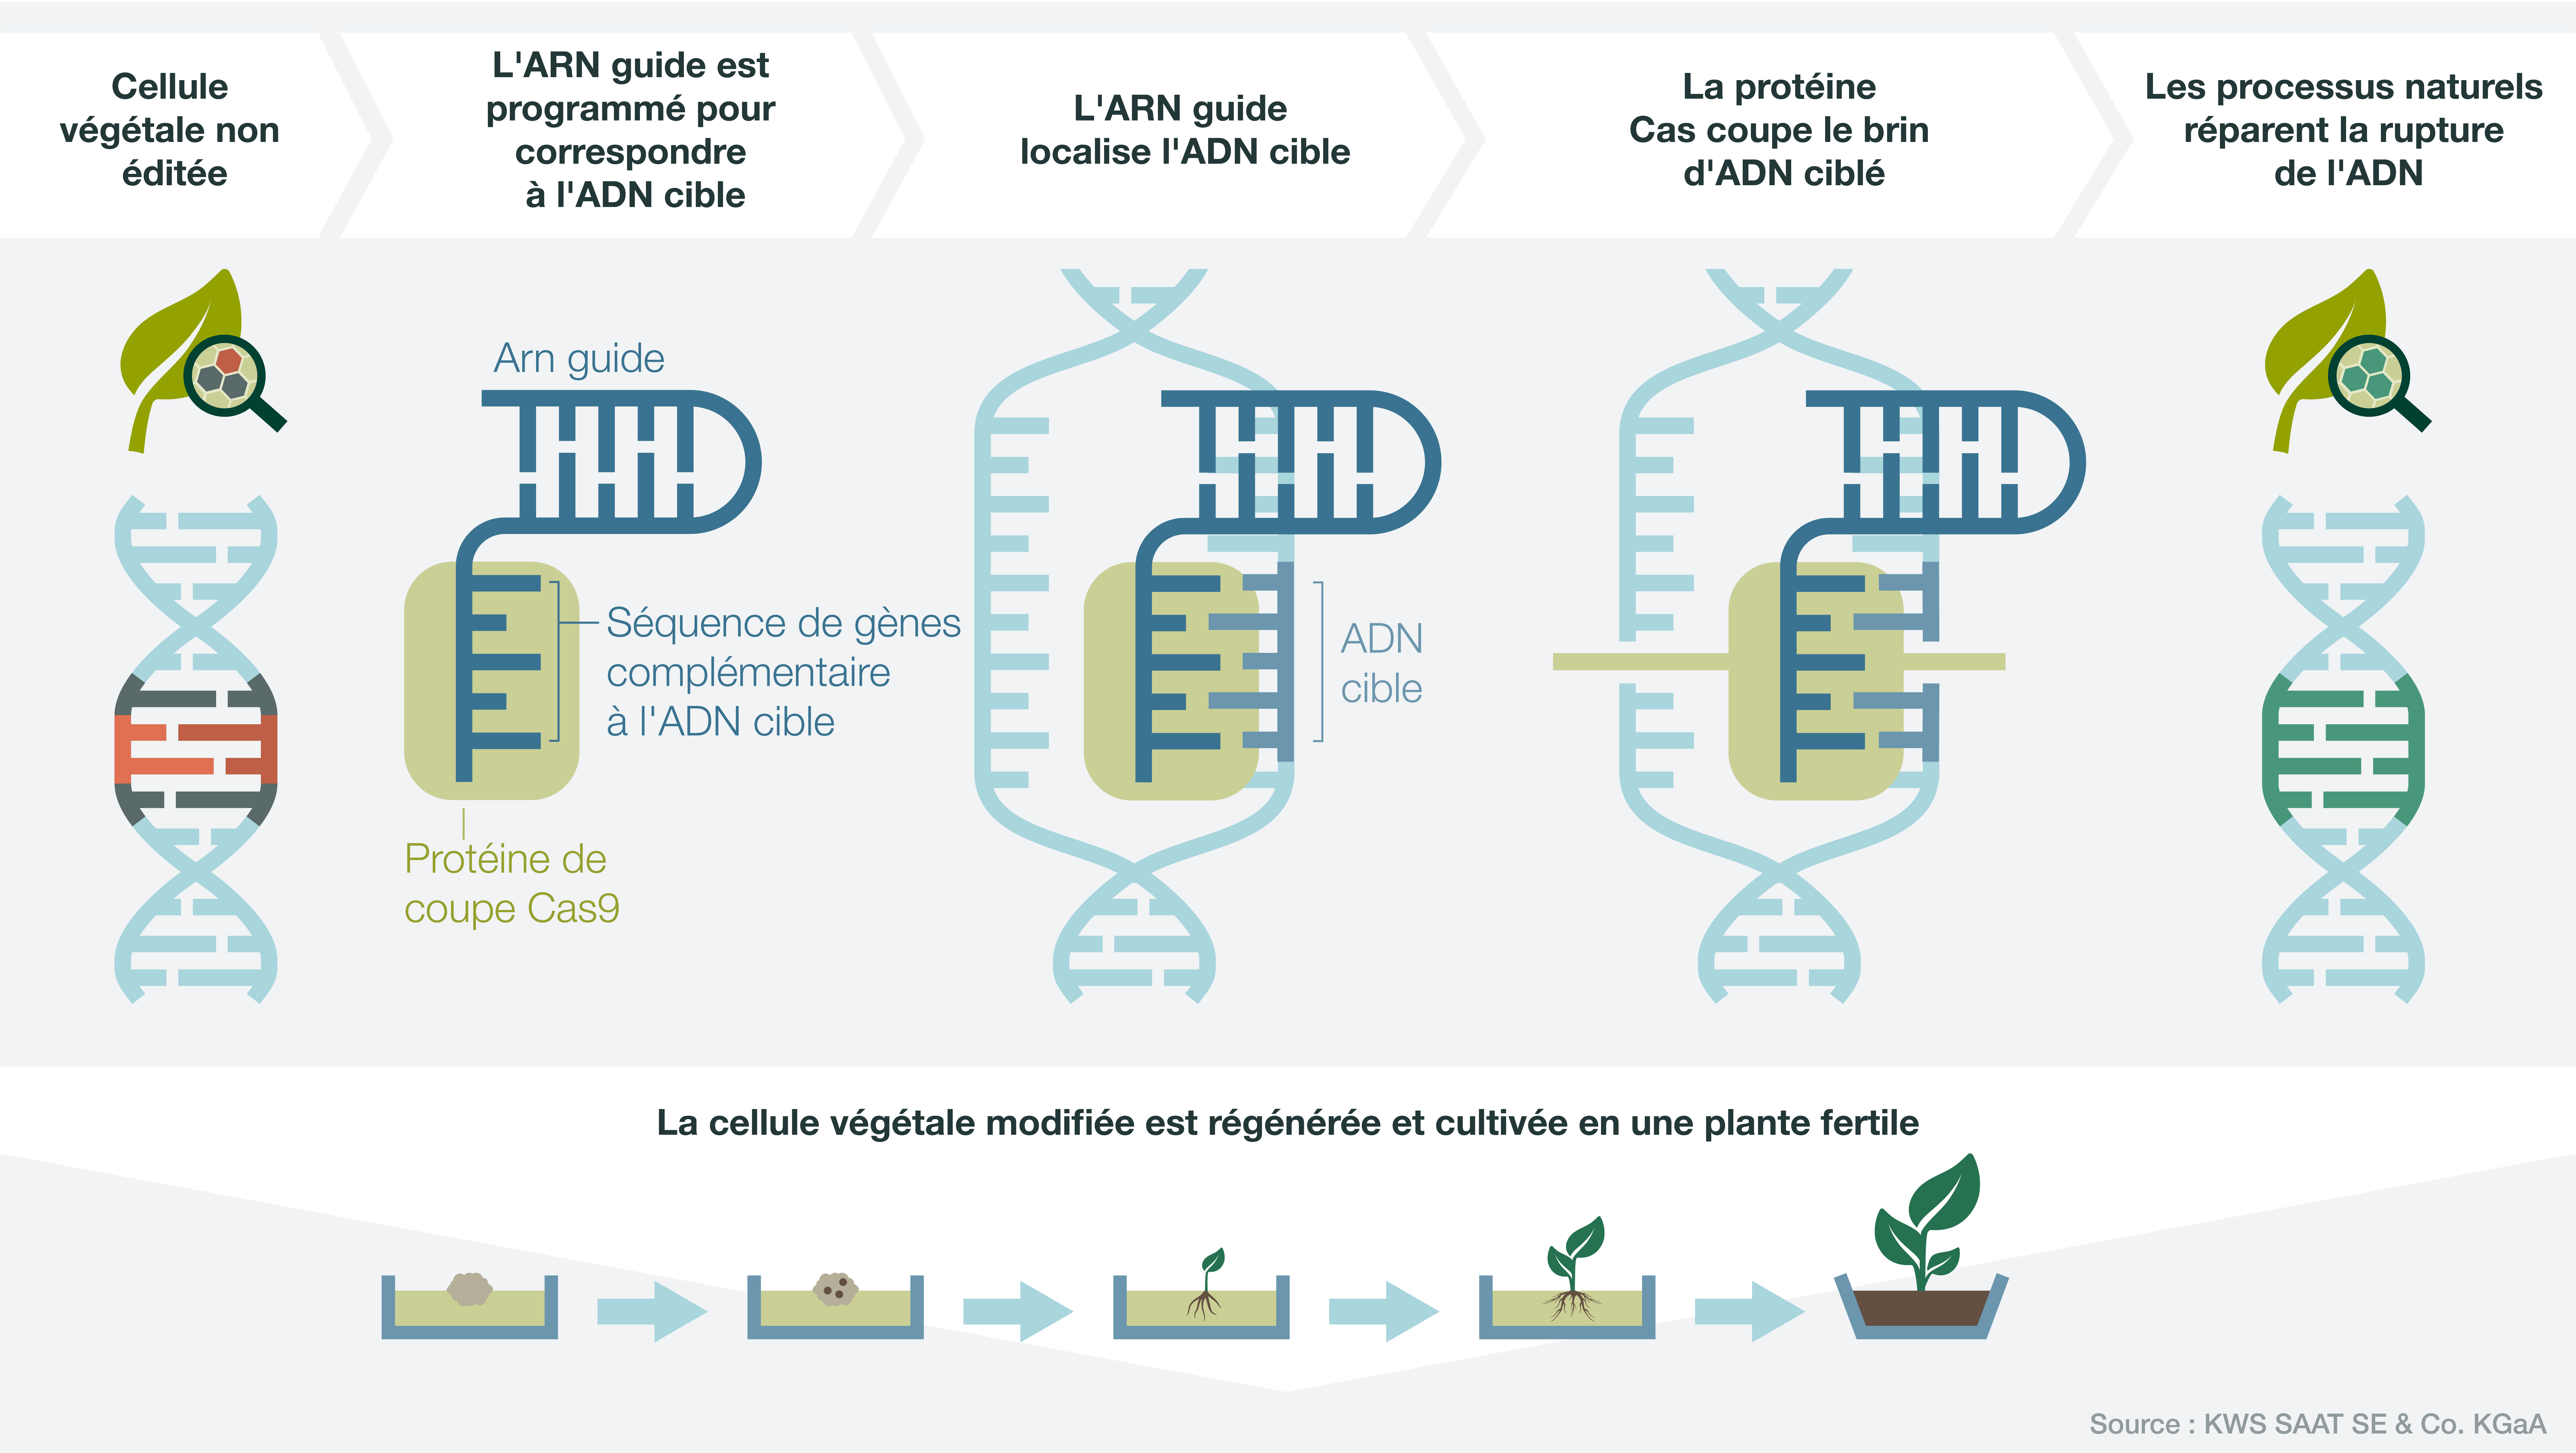 Infographic explaining the process of genome editing in plants using CRISP/Cas